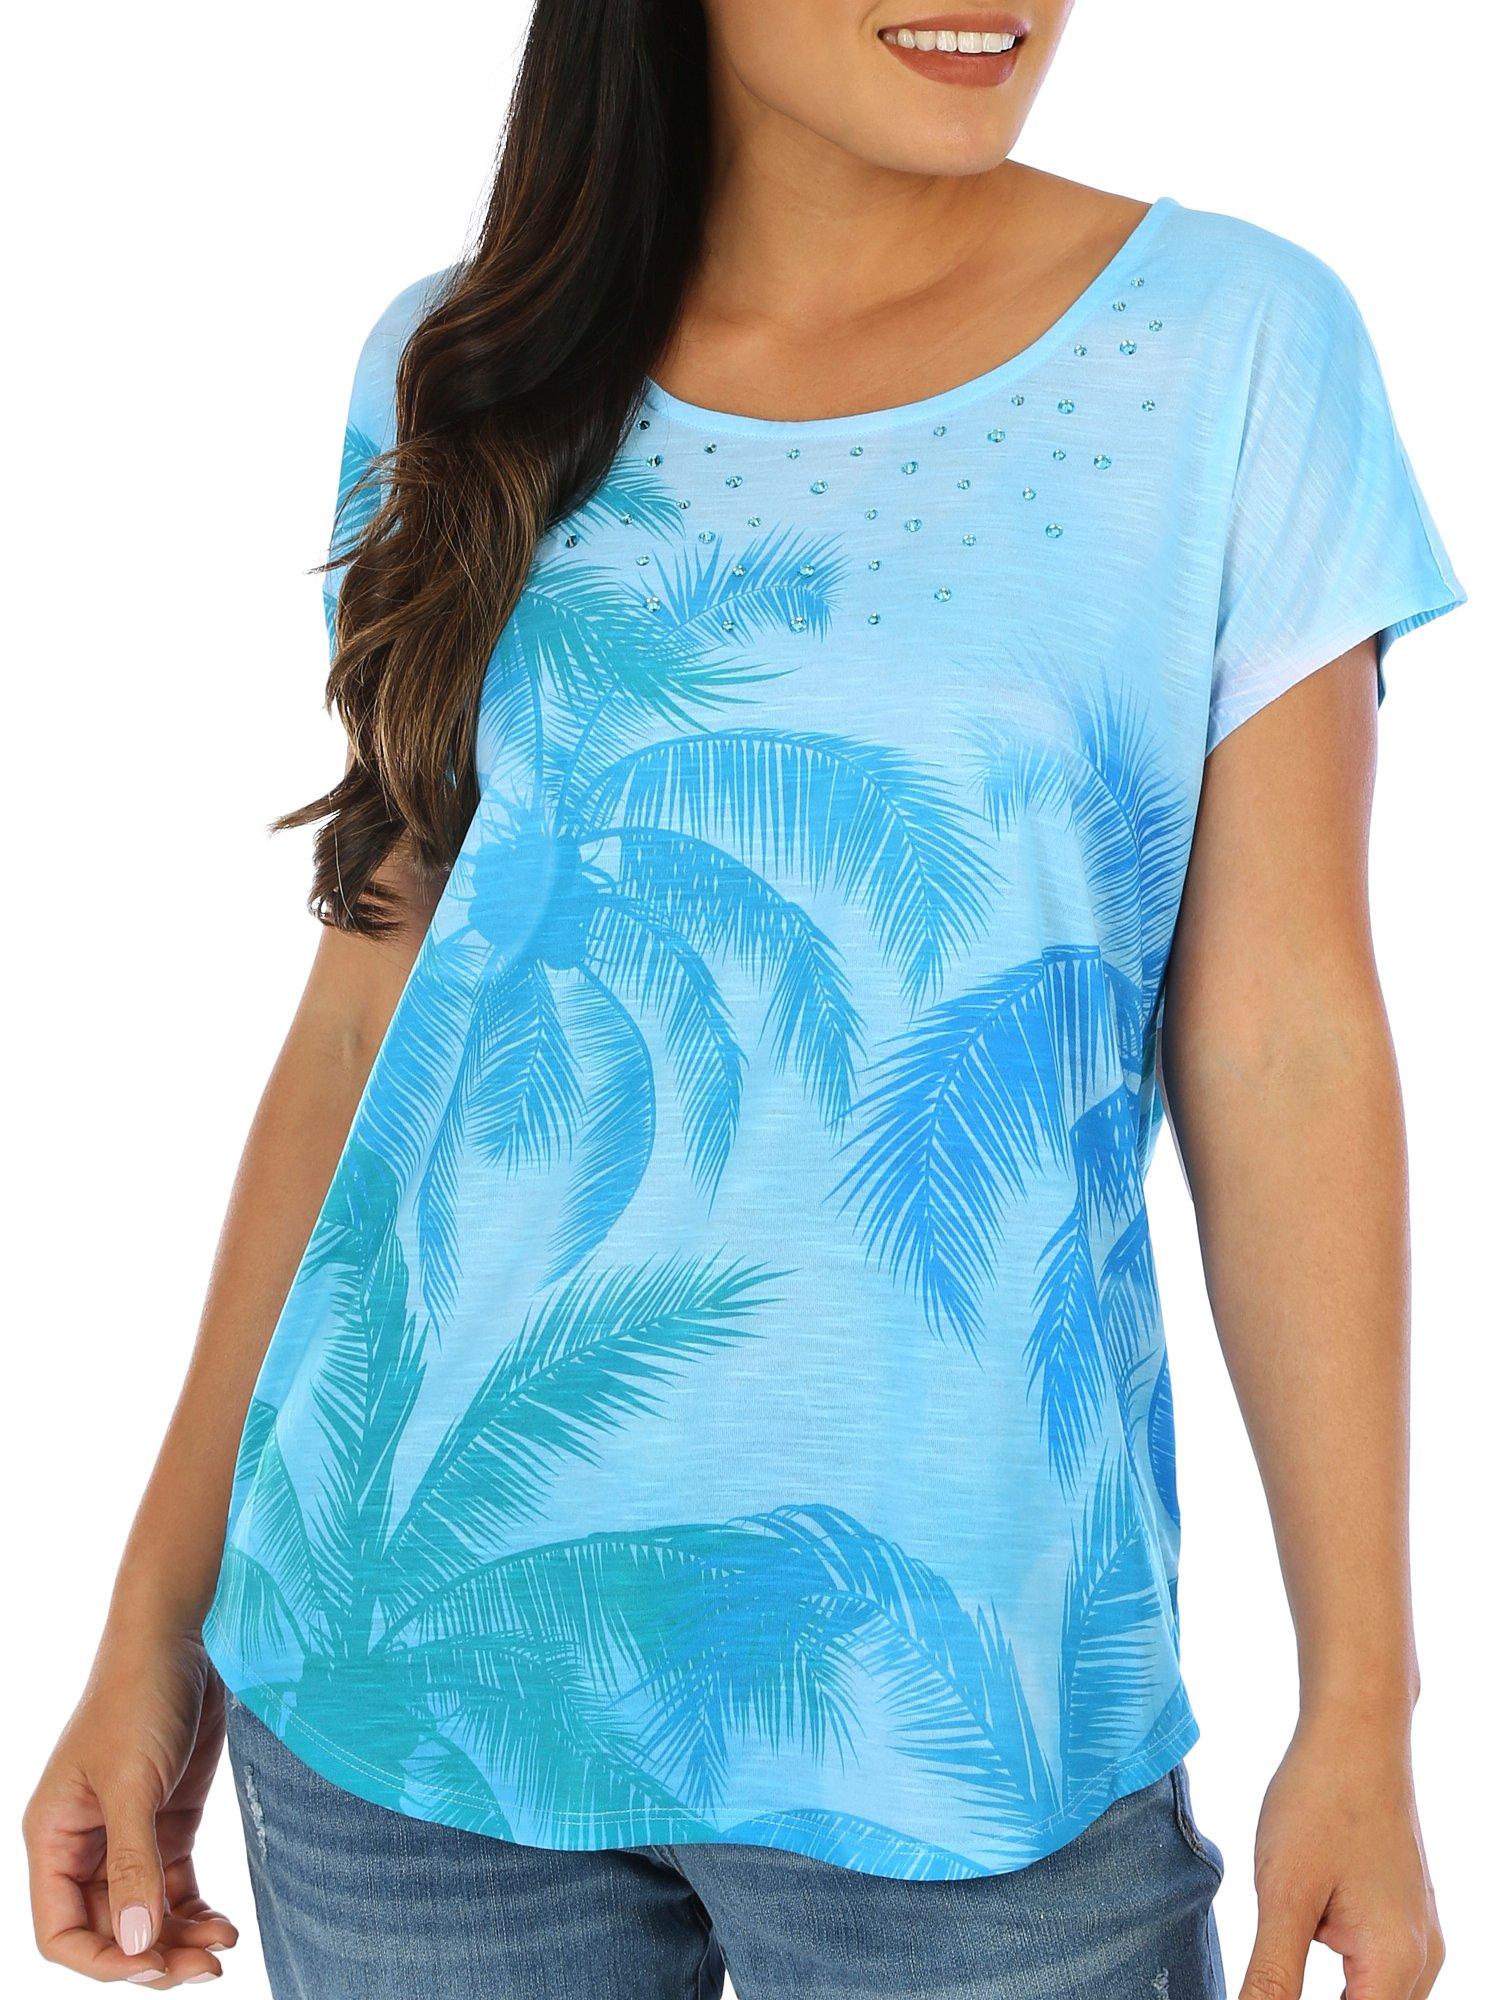 Coral Bay Womens Palms Print Embellished Short Sleeve